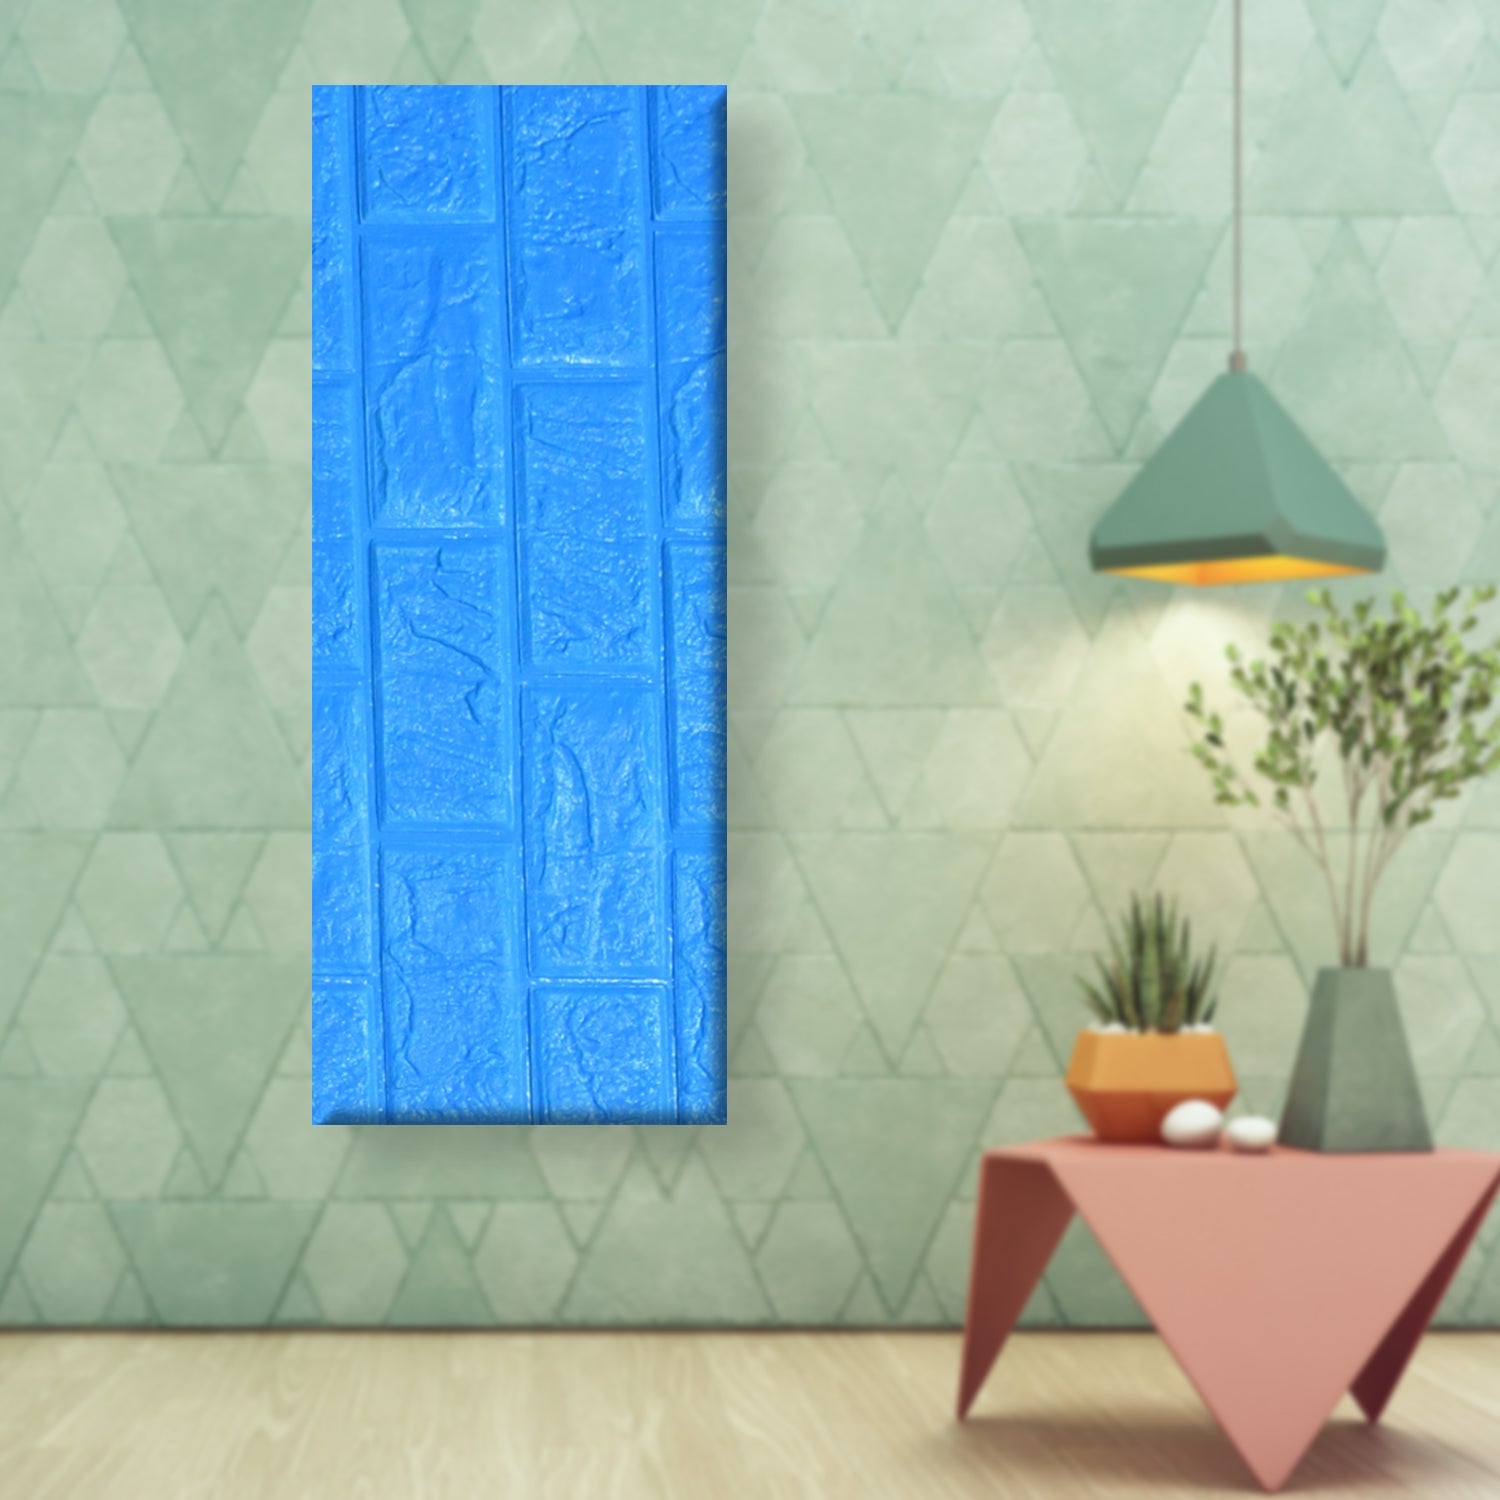 3D Adhesive wallpaper for living room. Room Wall Paper Home Decor Self Adhesive Wallpaper (60x30 Cm / Mix Color / 1 Pc)